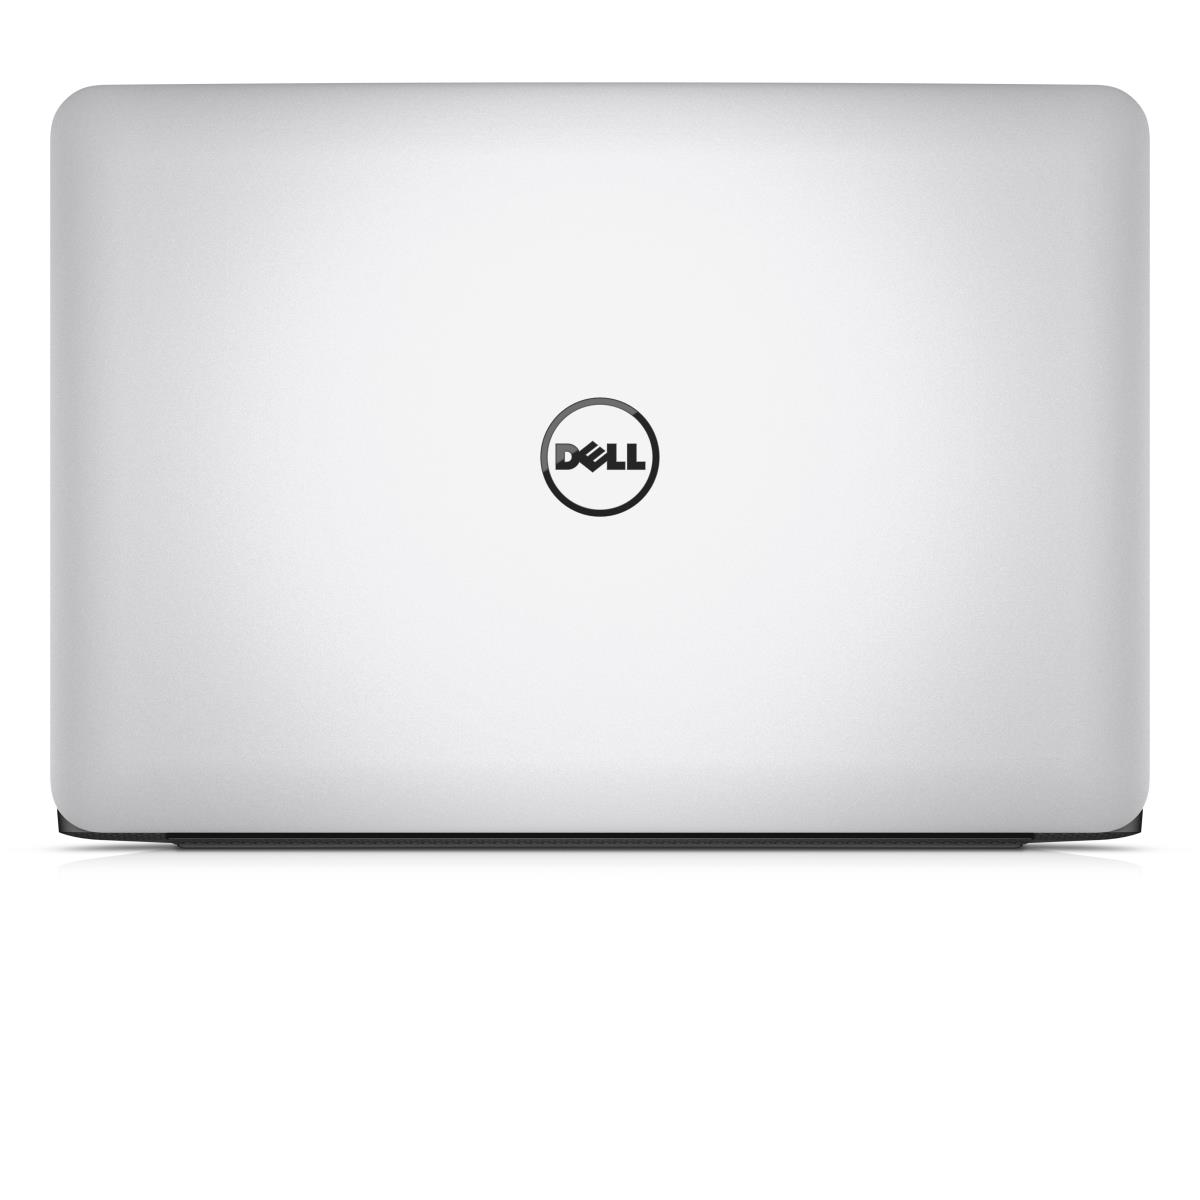 Dell XPS 15 - 2015